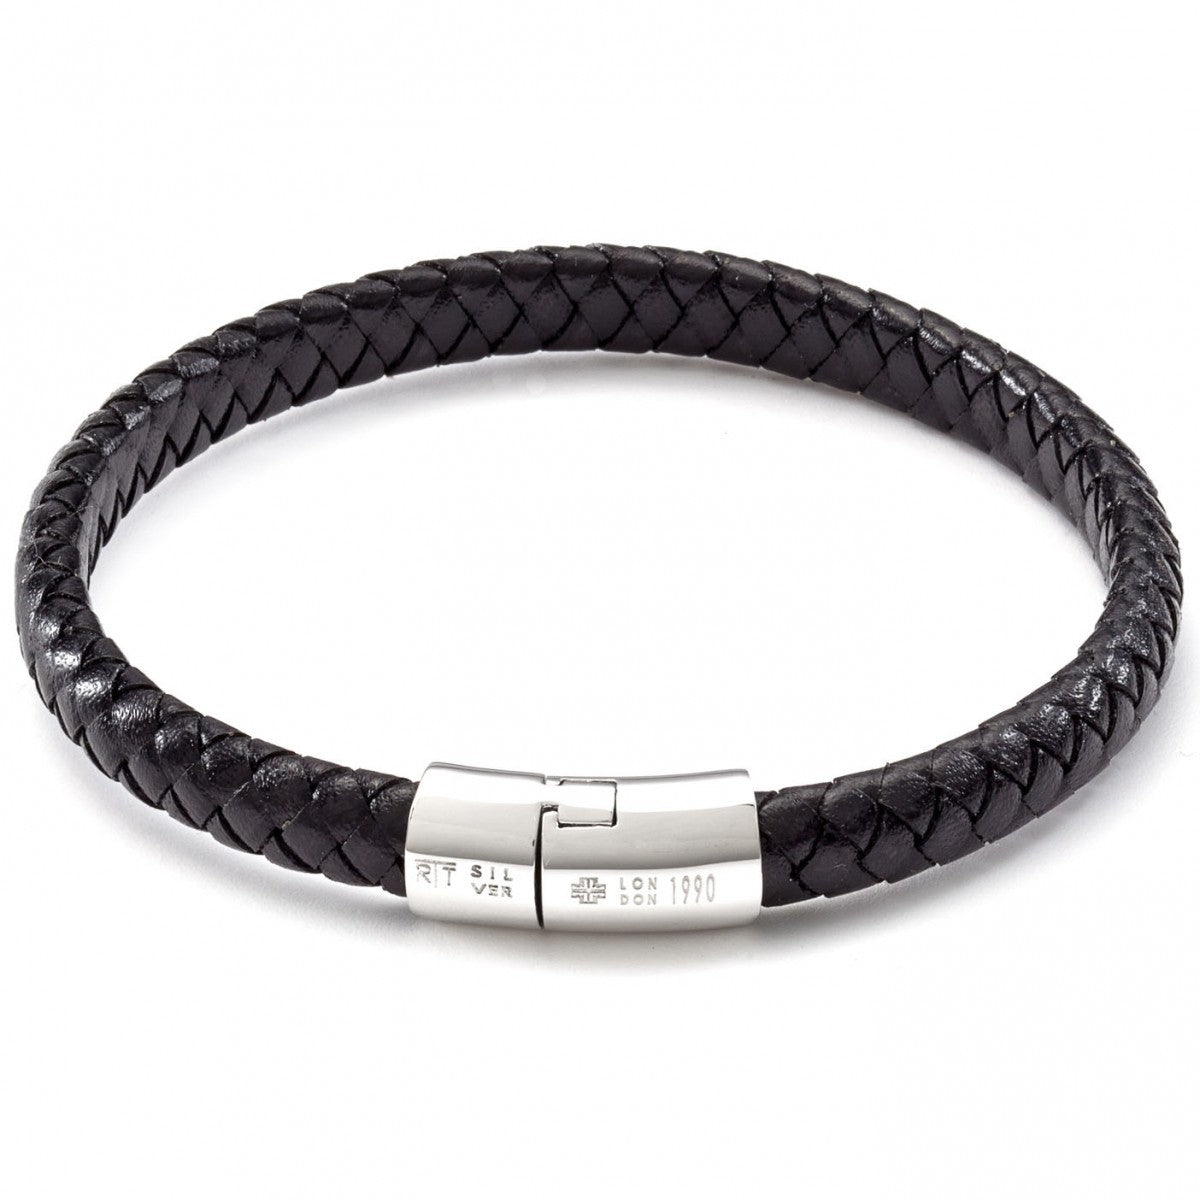 Tateossian Men's Leather Cobra Weave Bracelet with Sterling Silver Clasp, Black